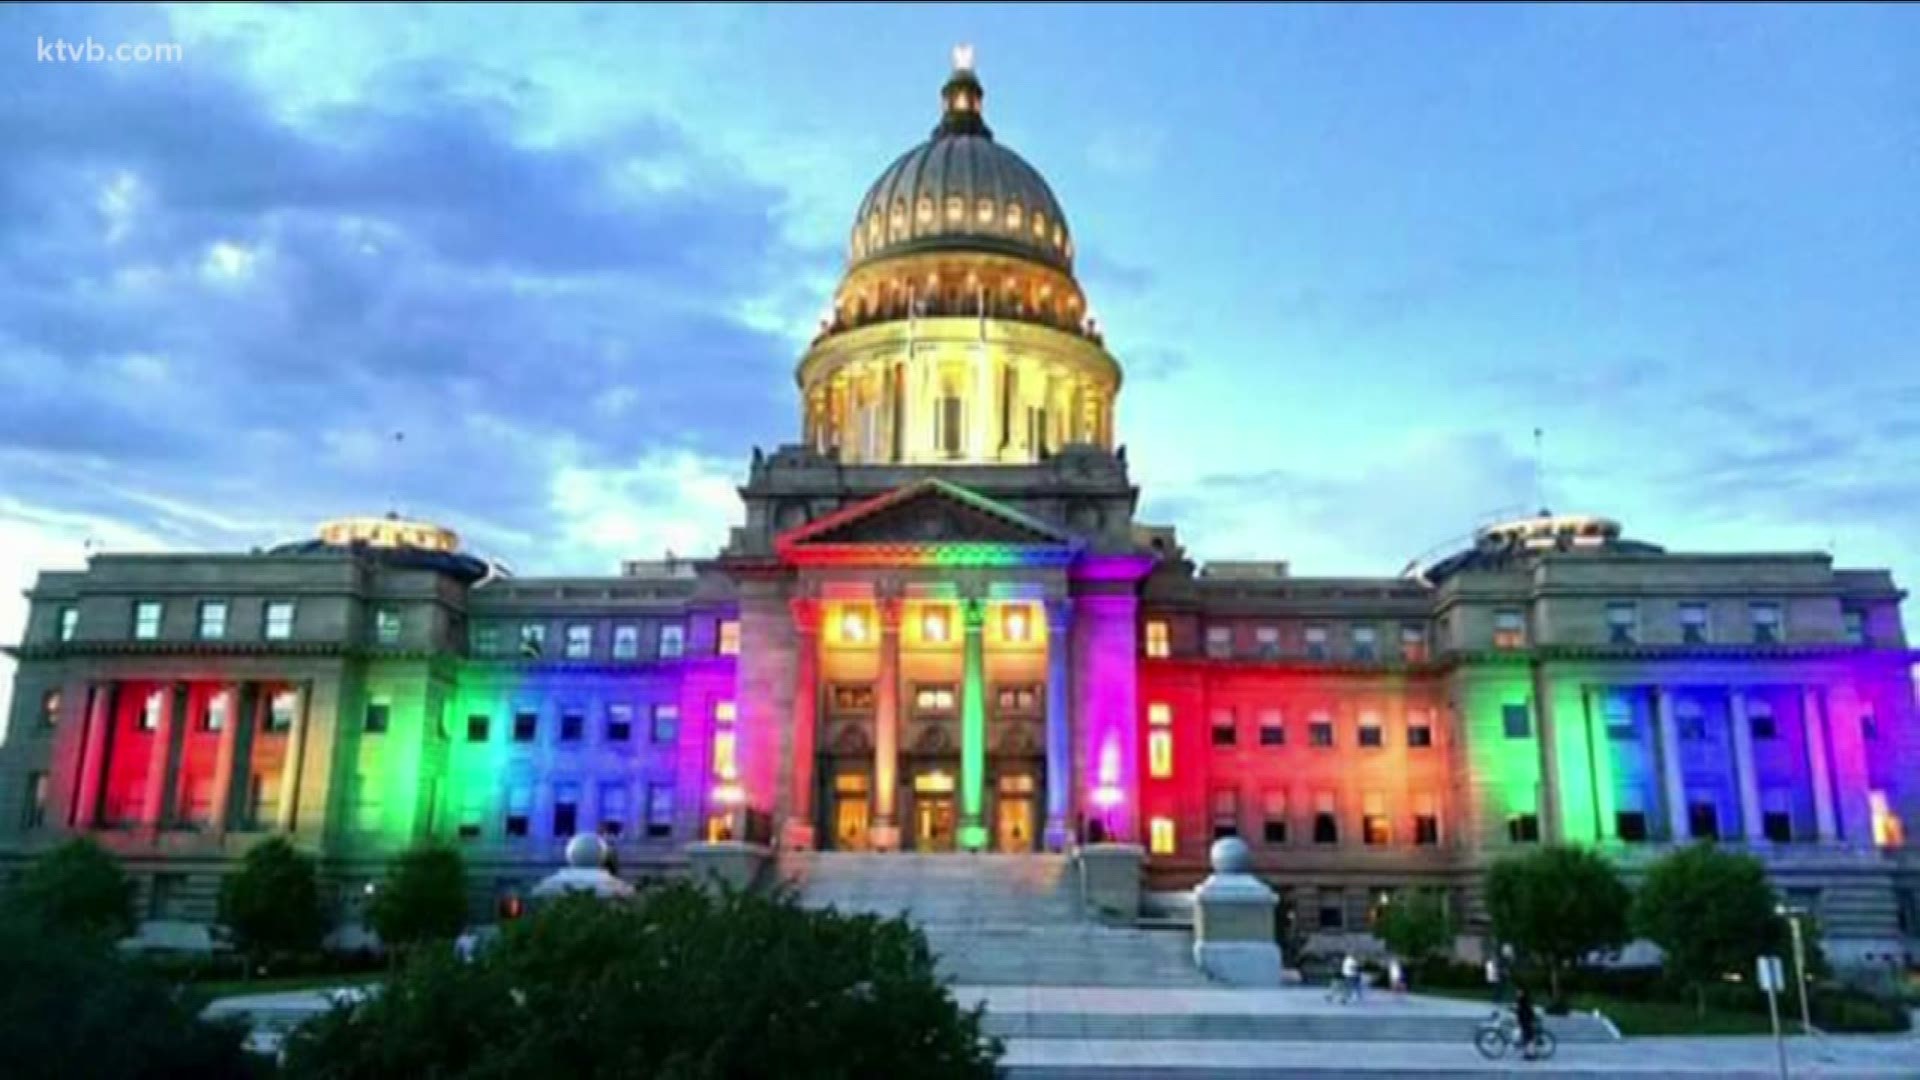 The fundraising effort began after organizers were told that they would not be allowed to illuminate the the Capitol Building, due to a state policy change.